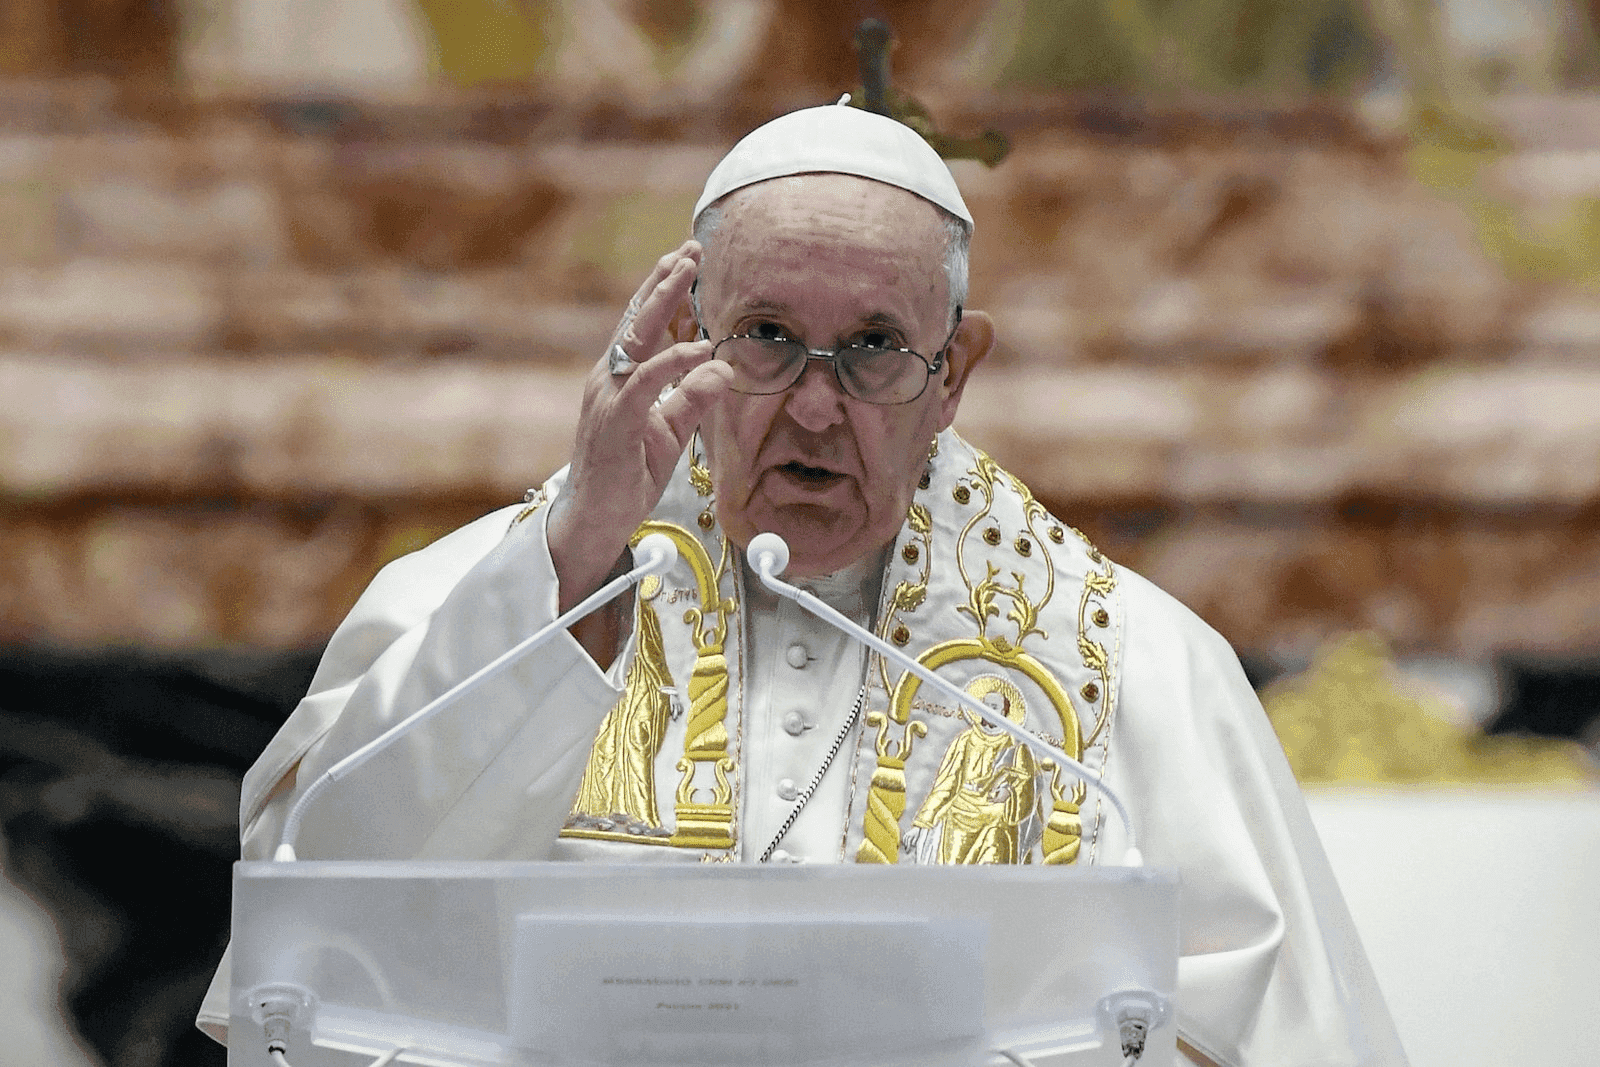 Pope Francis dismisses Borongan parish priest involved in alleged sexual abuse